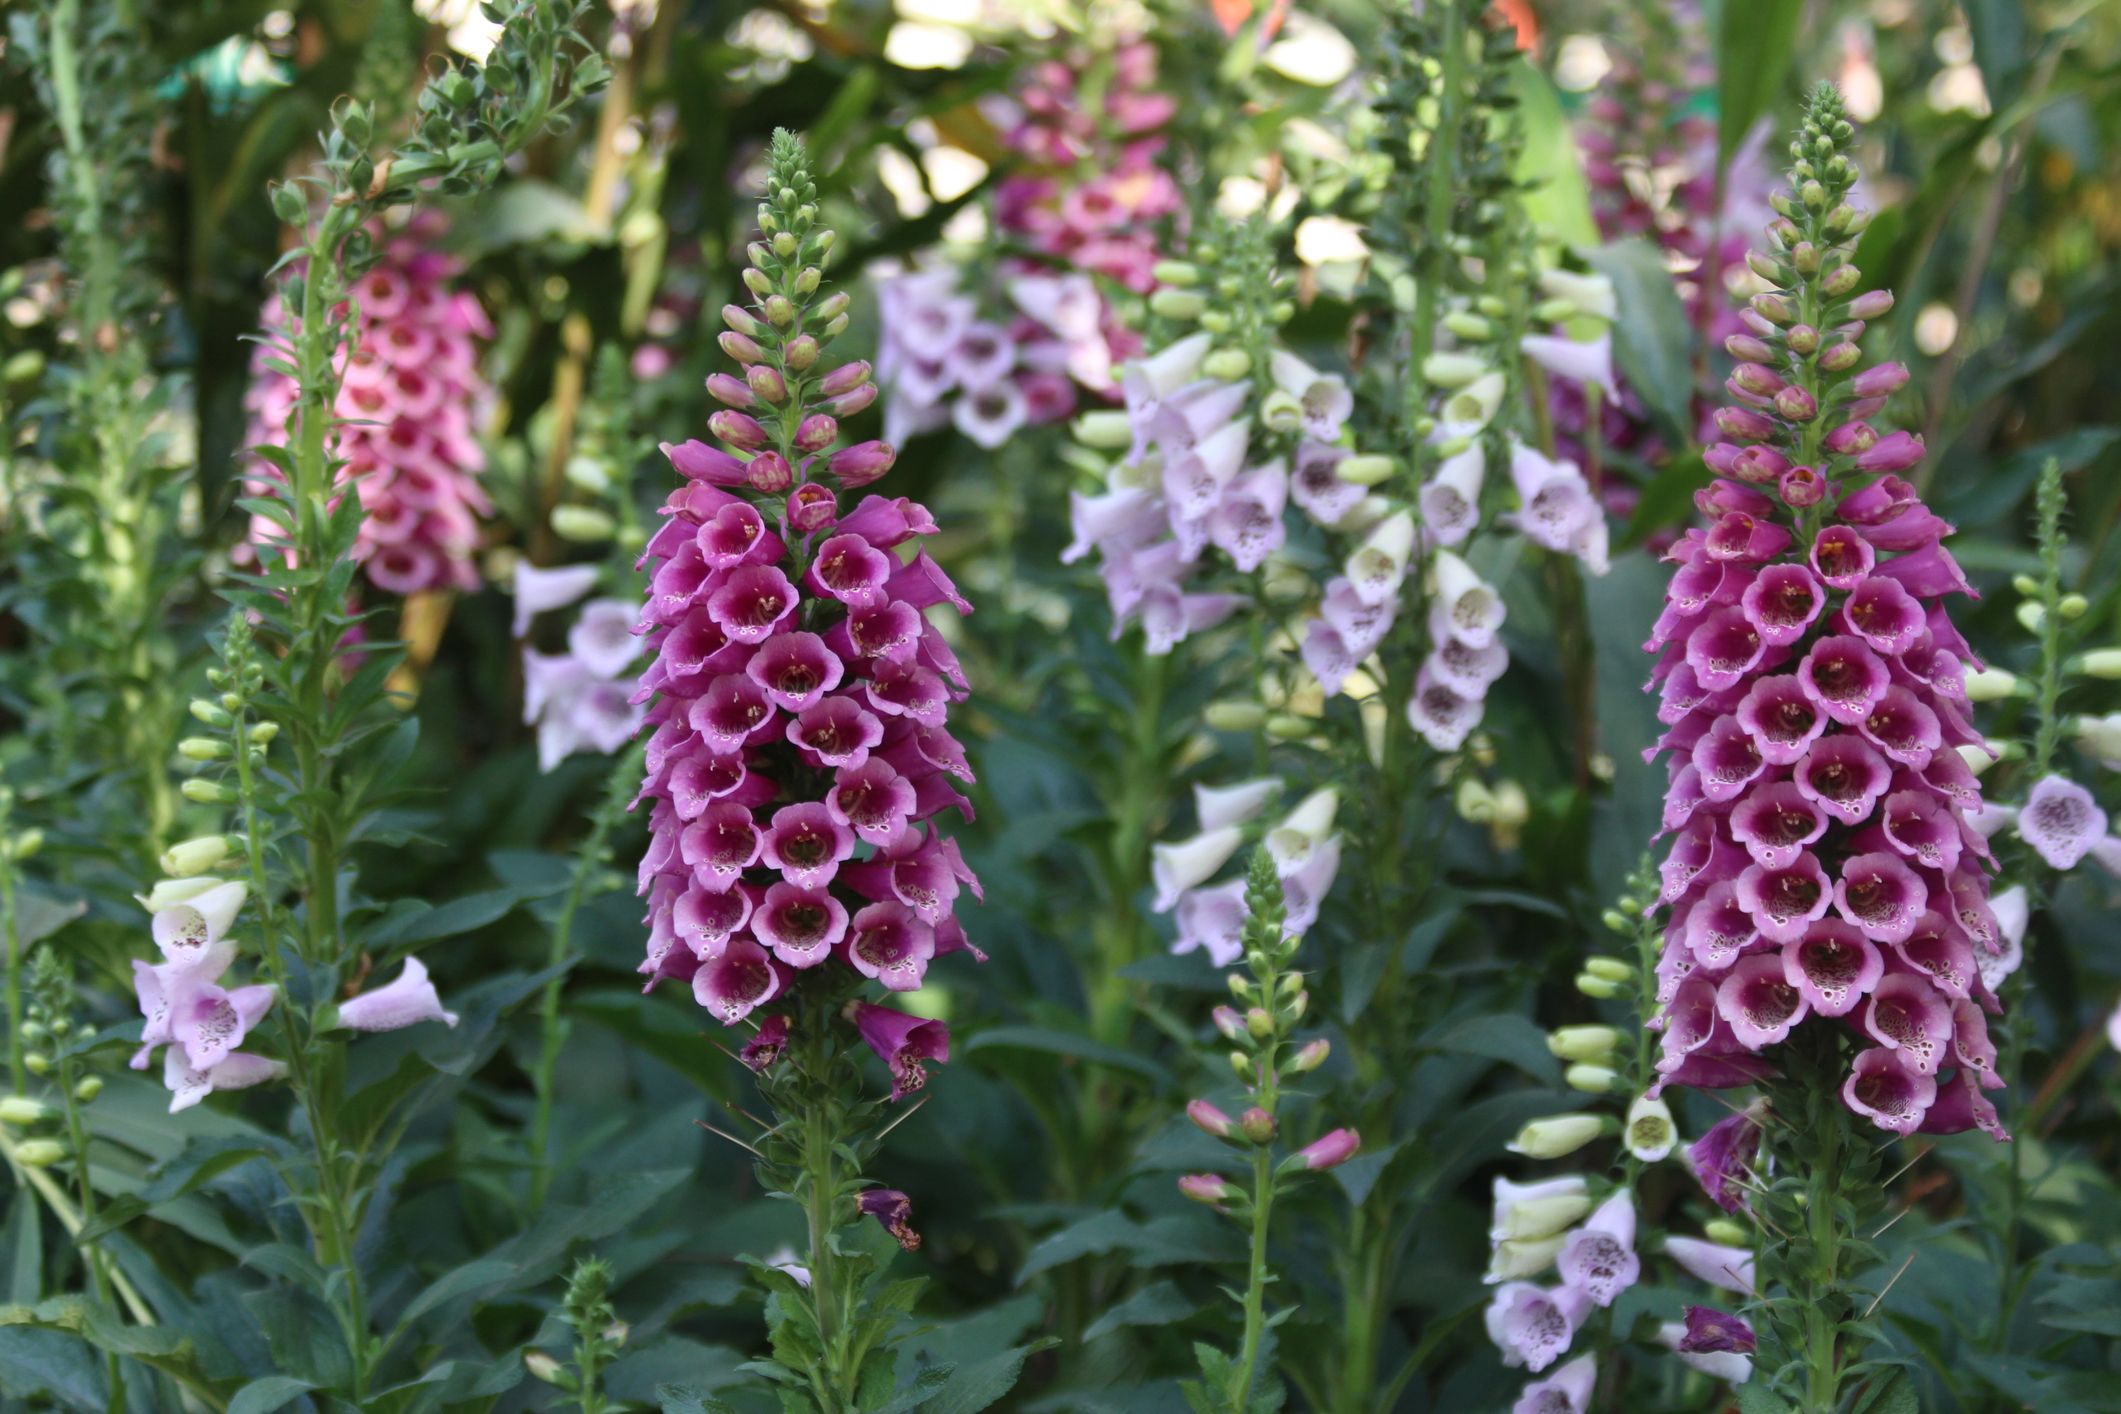 Foxgloves flowers are blooming in the garden